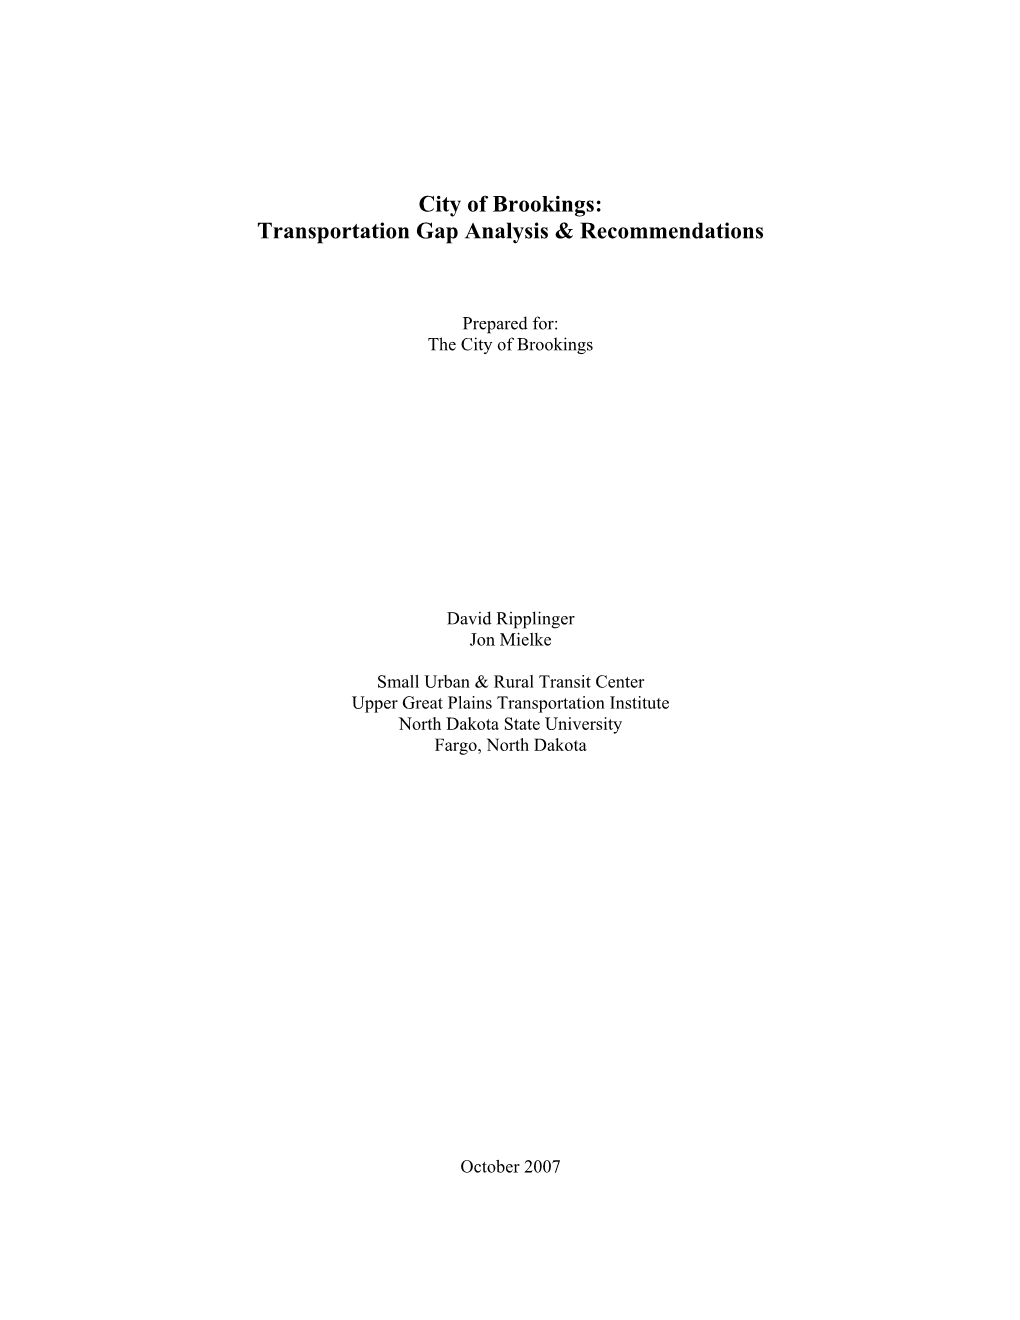 City of Brookings: Transportation Gap Analysis & Recommendations